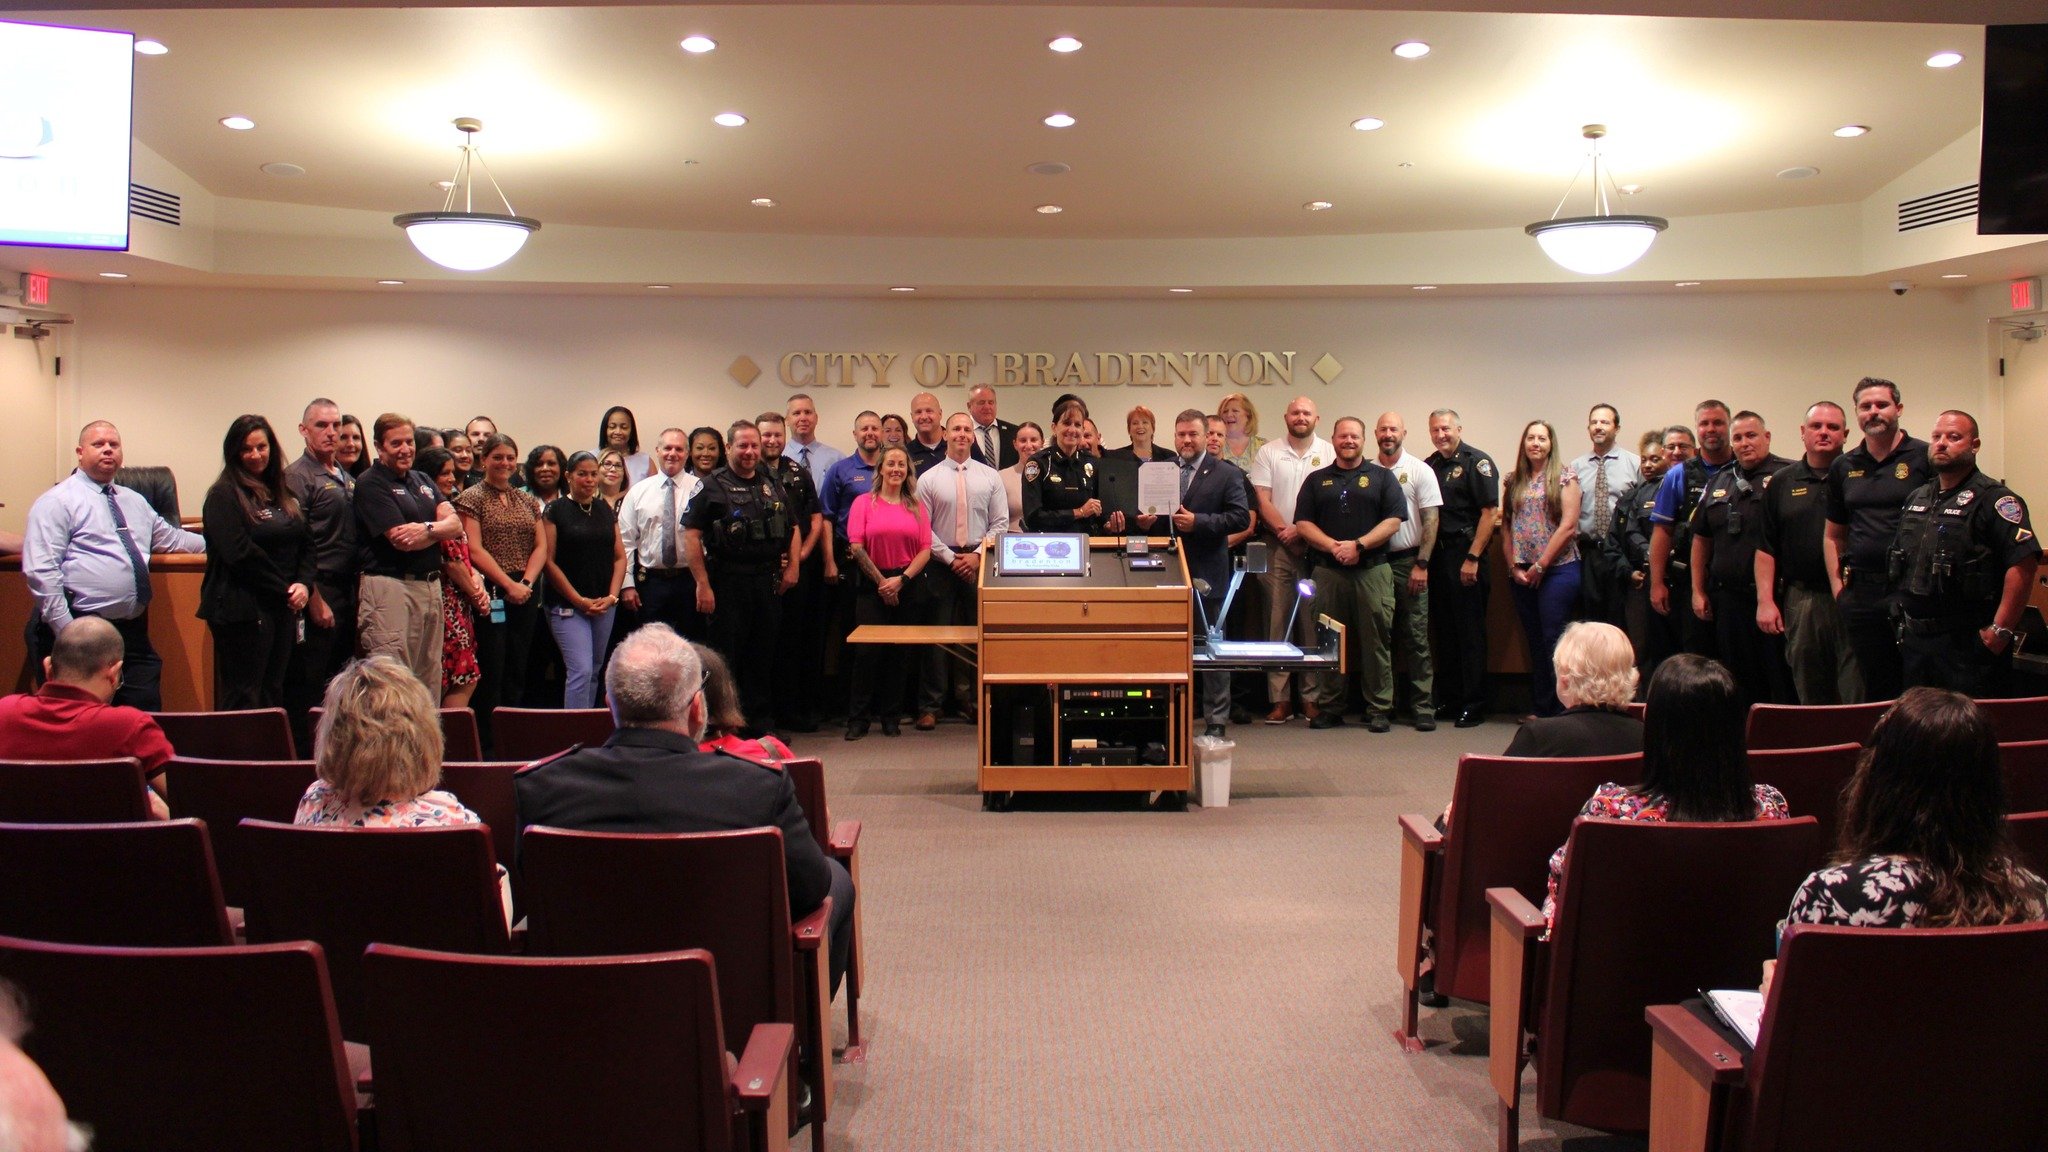 During this morning's council meeting, Councilman Josh Cramer, who retired from BPD in 2022, proclaimed May 12-18 National Police Week in the City of Bradenton. In 1962, President Kennedy proclaimed May 15 as National Peace Officers Memorial Day and 